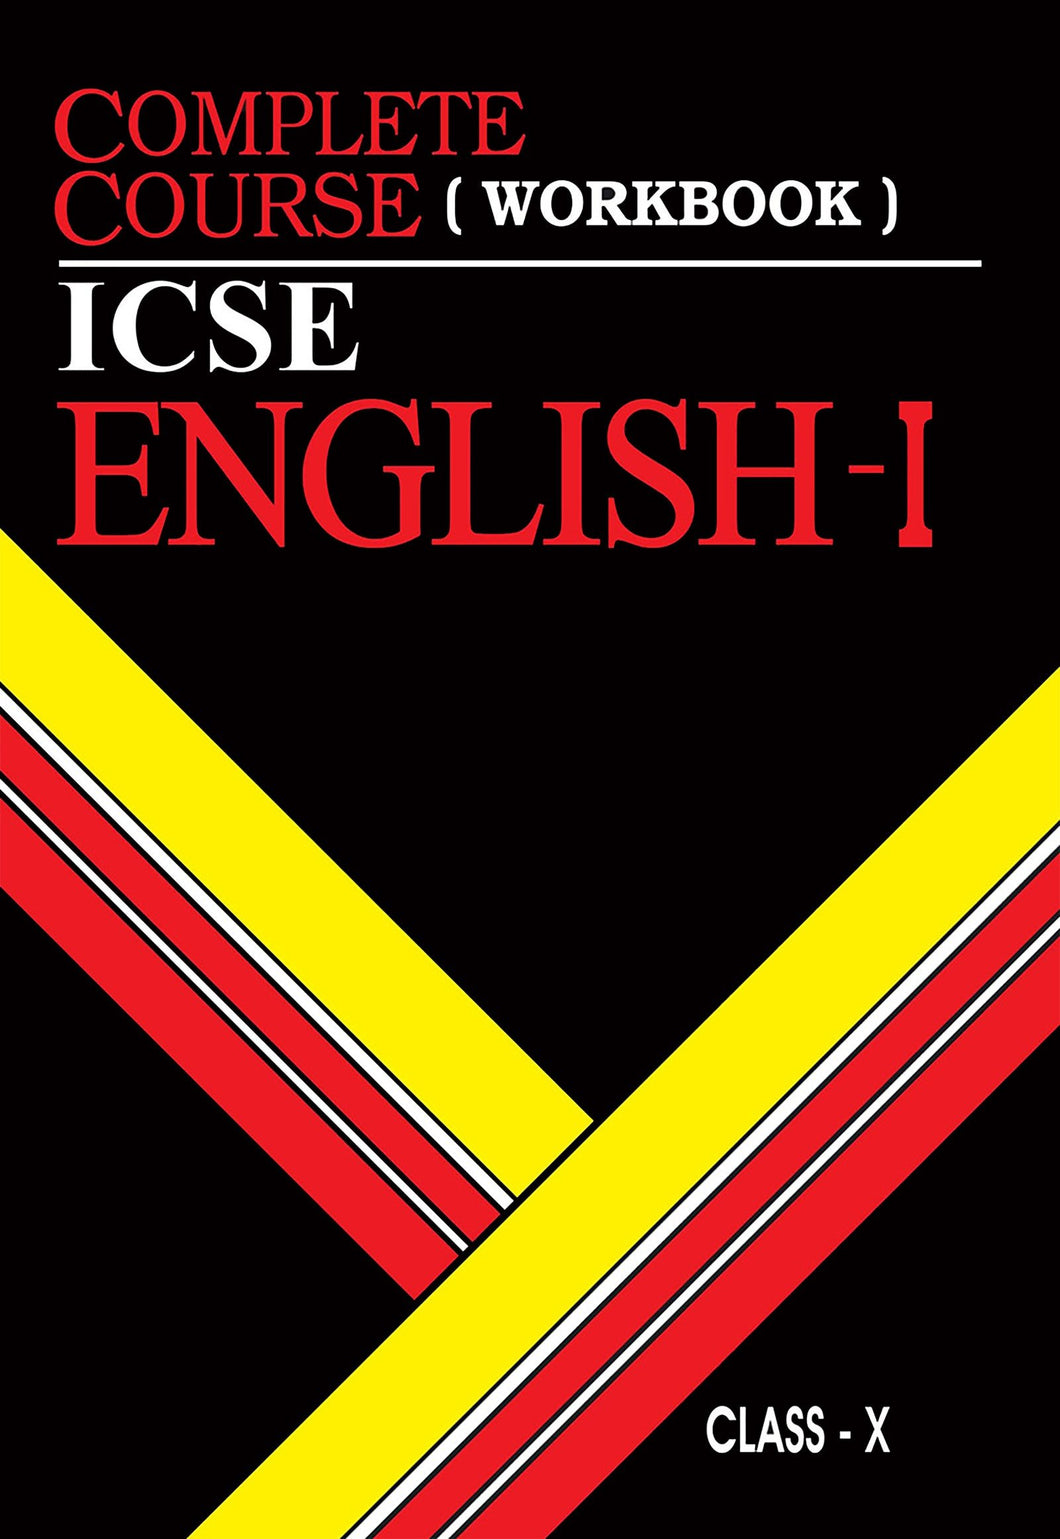 Oswal Complete Course Workbook English 1: ICSE Class 10